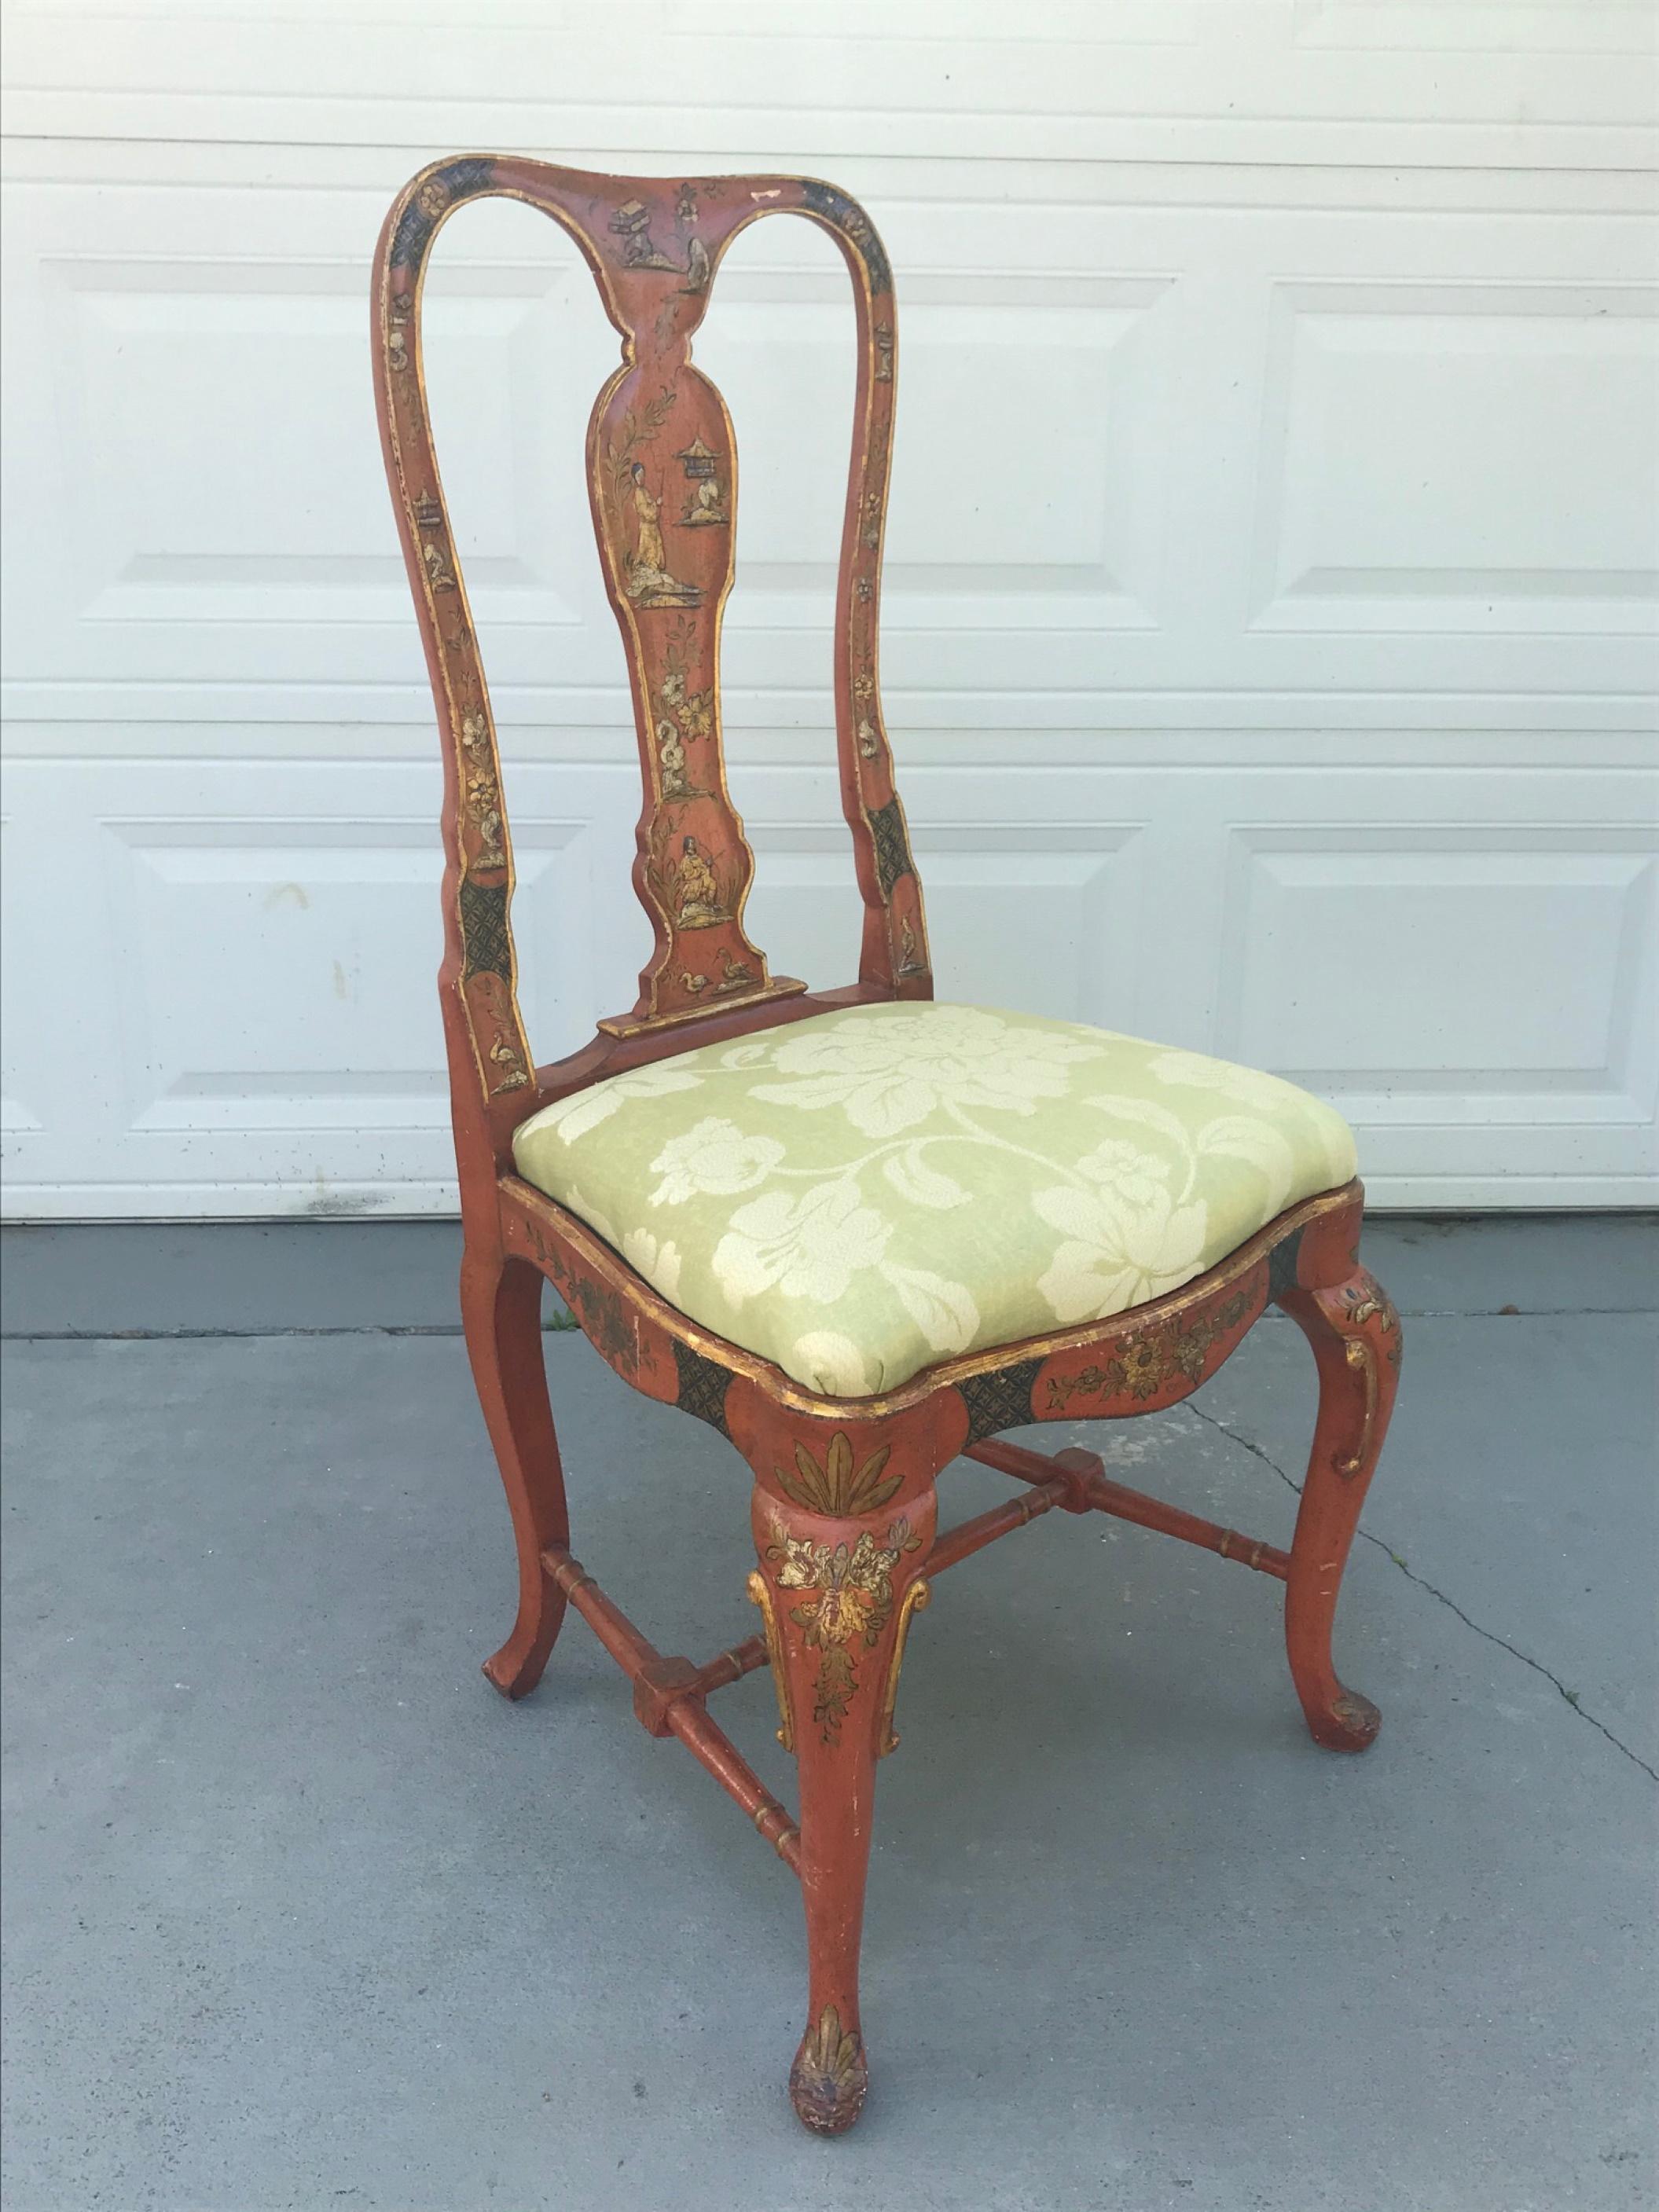 Japanned 19th Century English Queen Anne Style Chinoiserie Scarlett Lacquer Side Chair